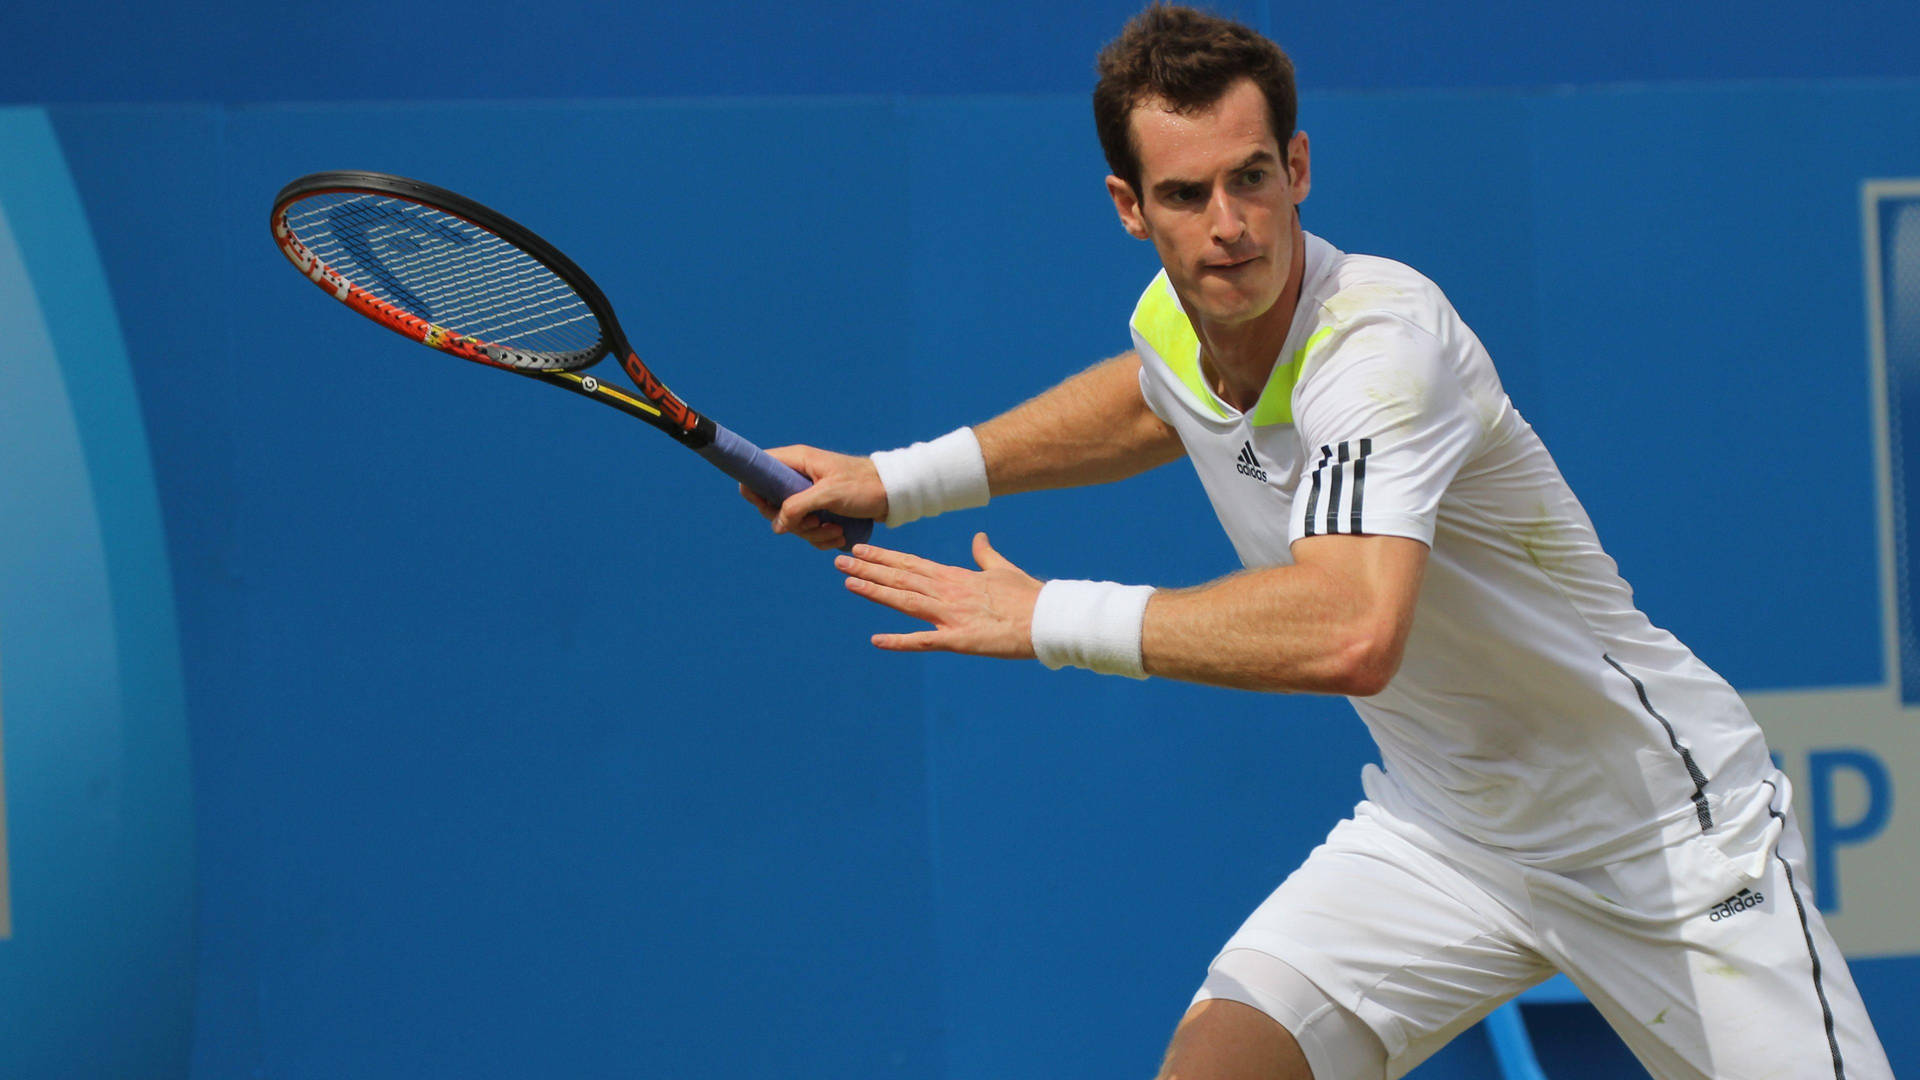 Andy Murray In Position To Hit Ball